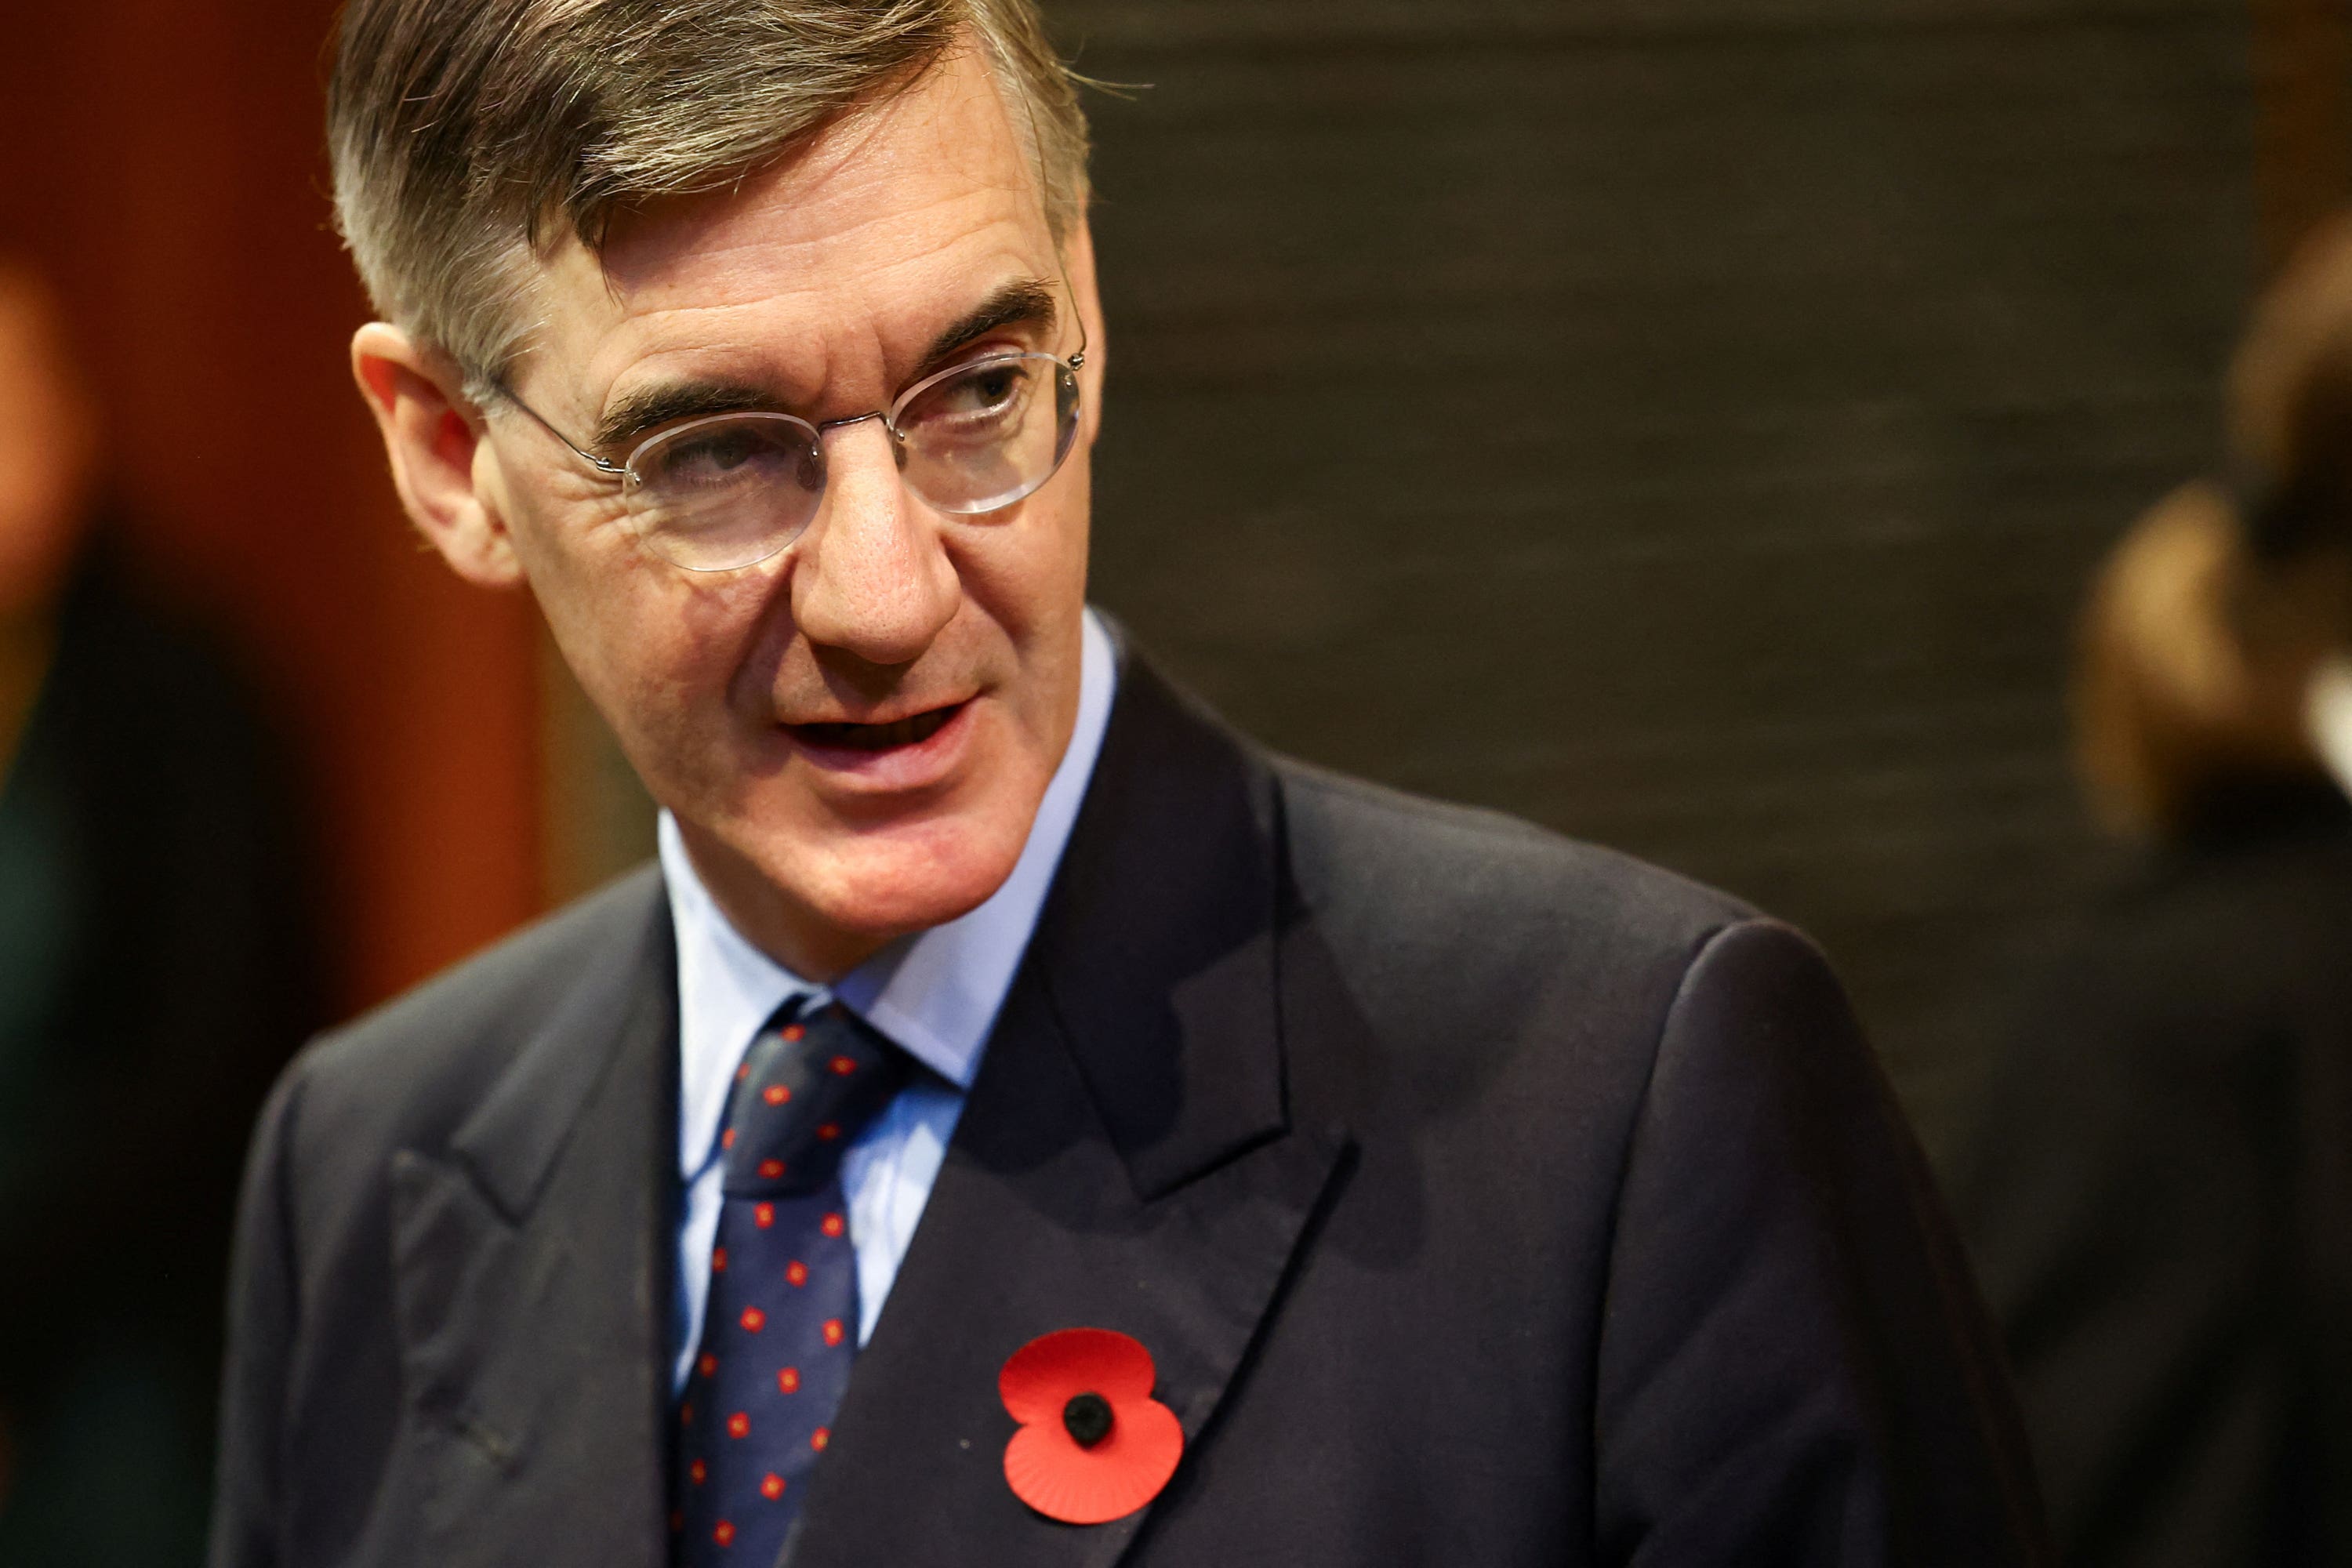 Jacob Rees-Mogg said Mr Trump is ‘better disposed’ towards the United Kingdom